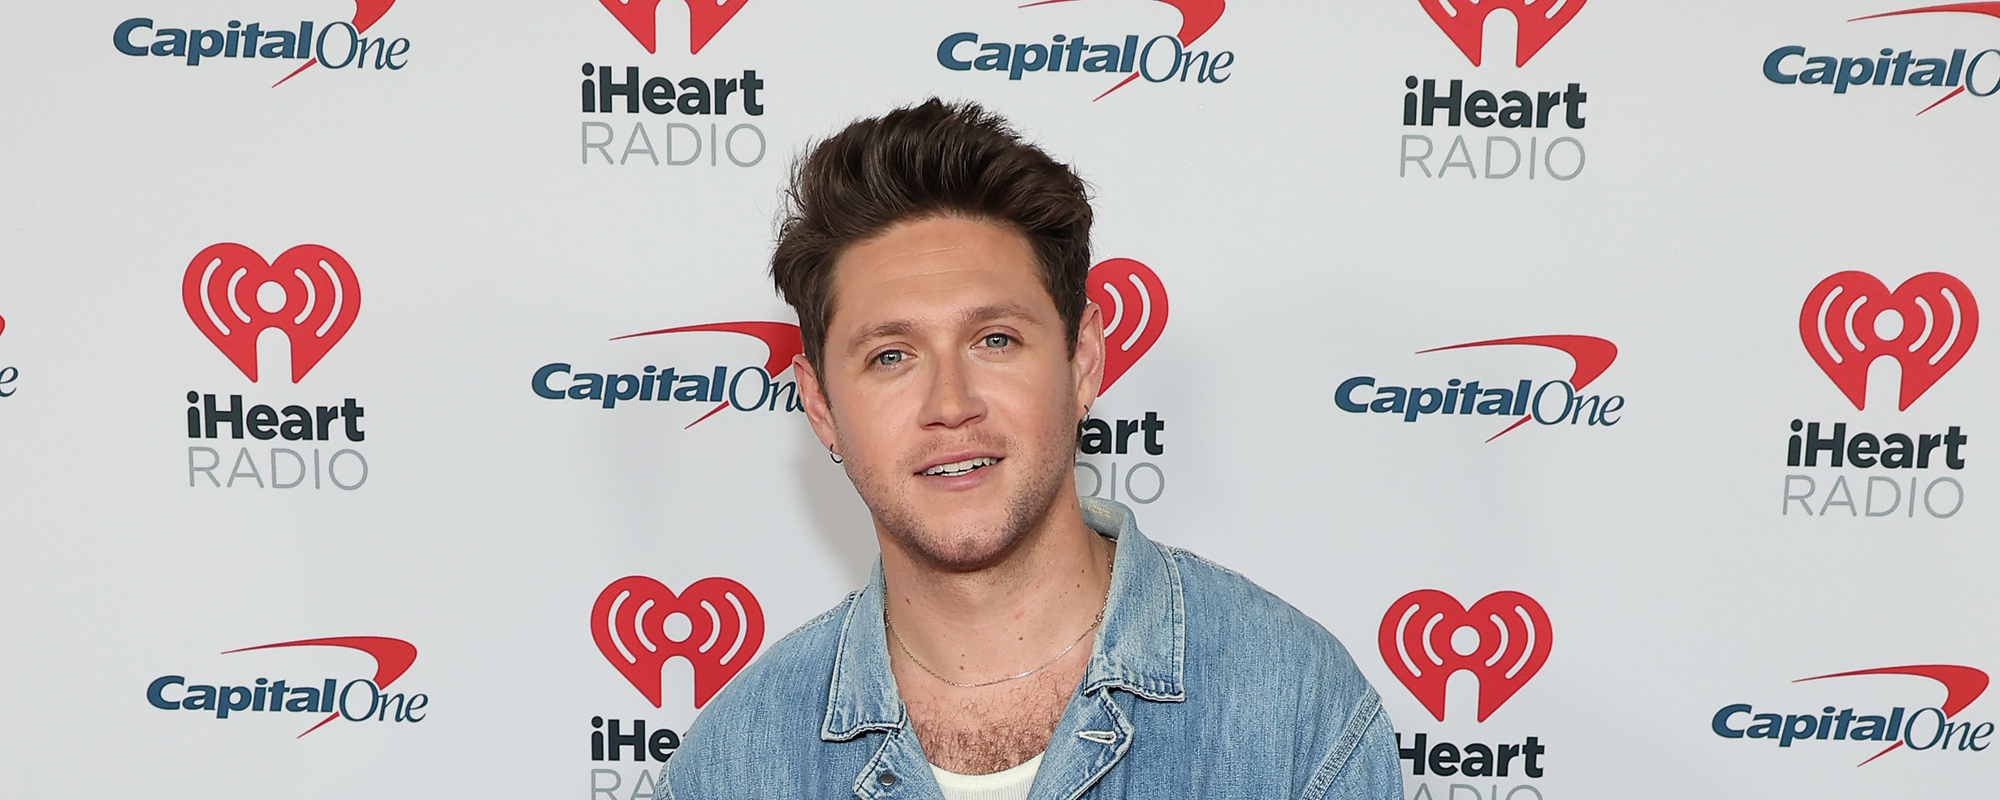 ‘The Voice’ Fans Inconsolable Over Niall Horan Leaving, Coaching Changes: “Not Watching”